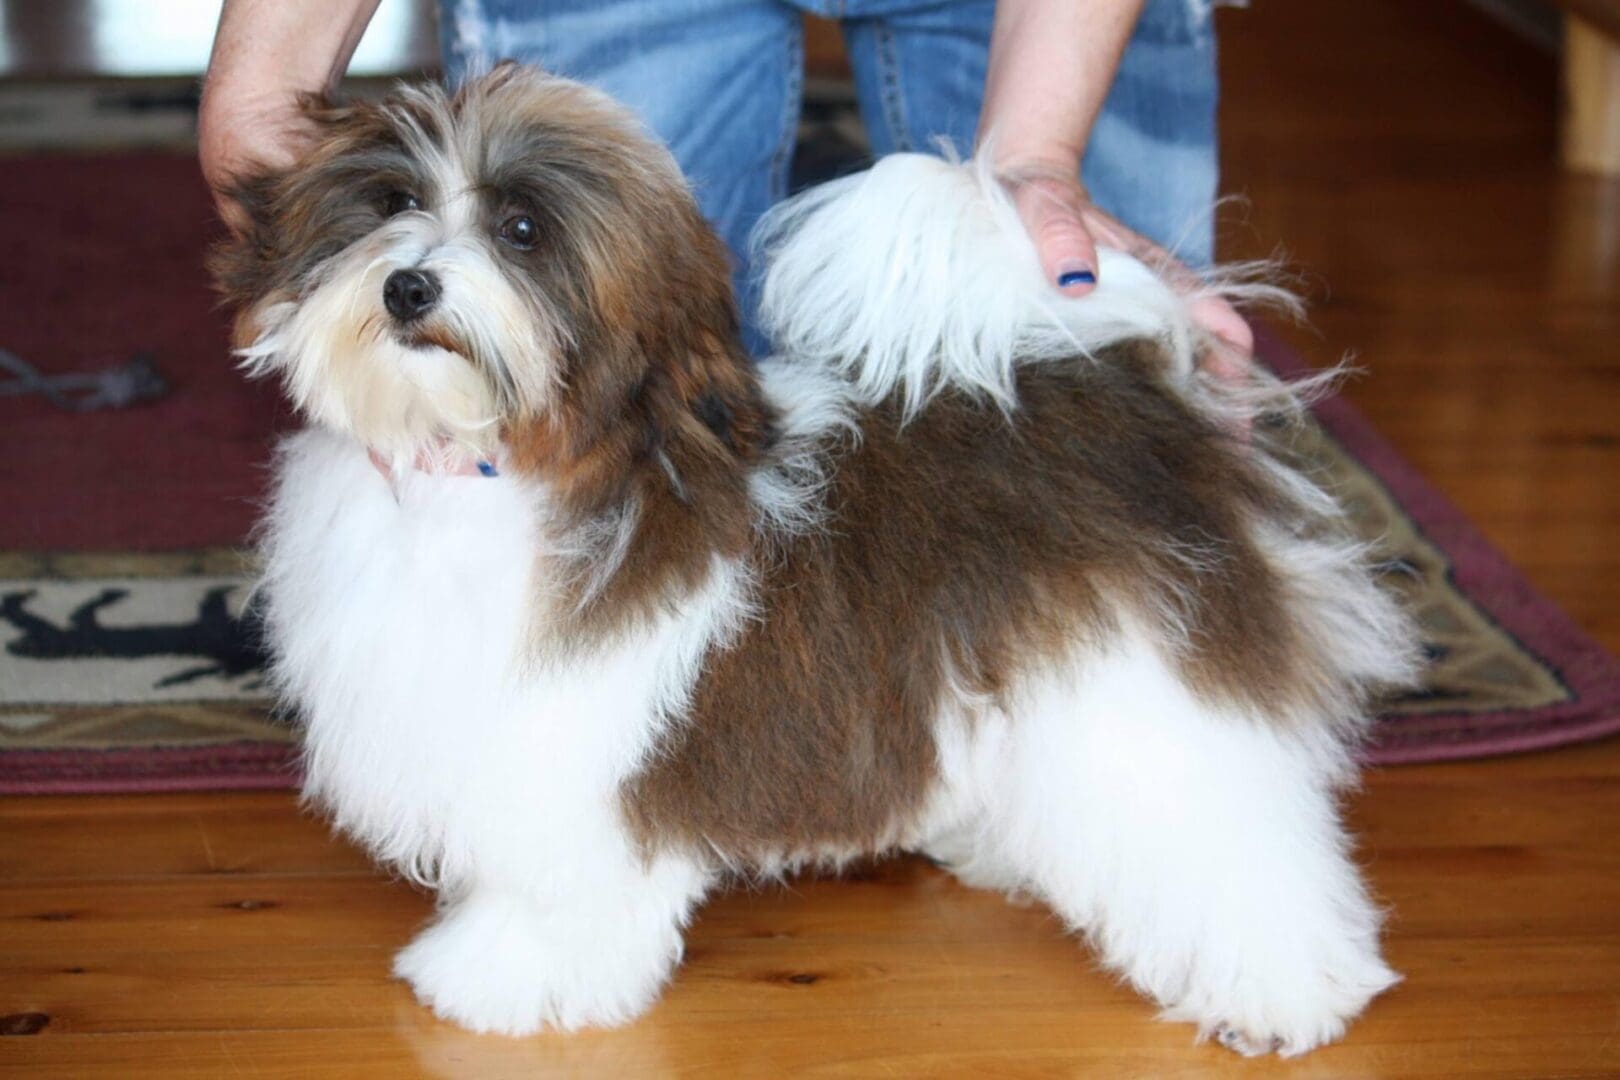 A small brown and white Havanese puppy standing on a wooden floor.